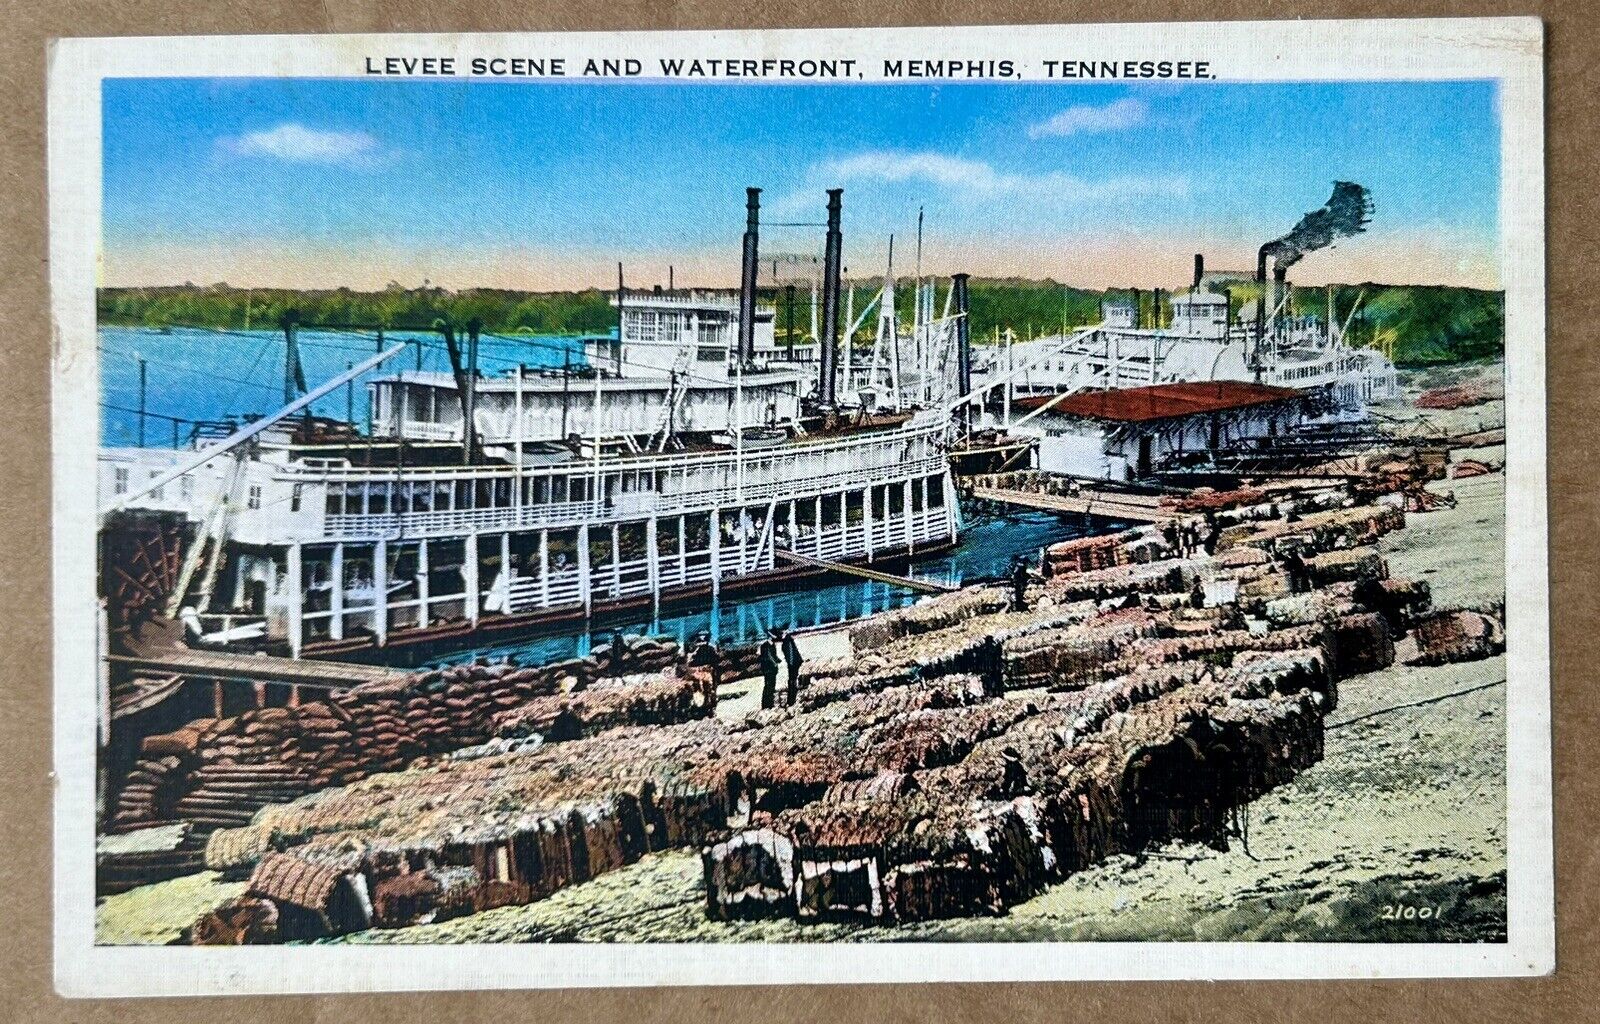 LEVEE SCENE AND WATERFRONT, MEMPHIS, TENNESSEE. TN Vintage Postcard